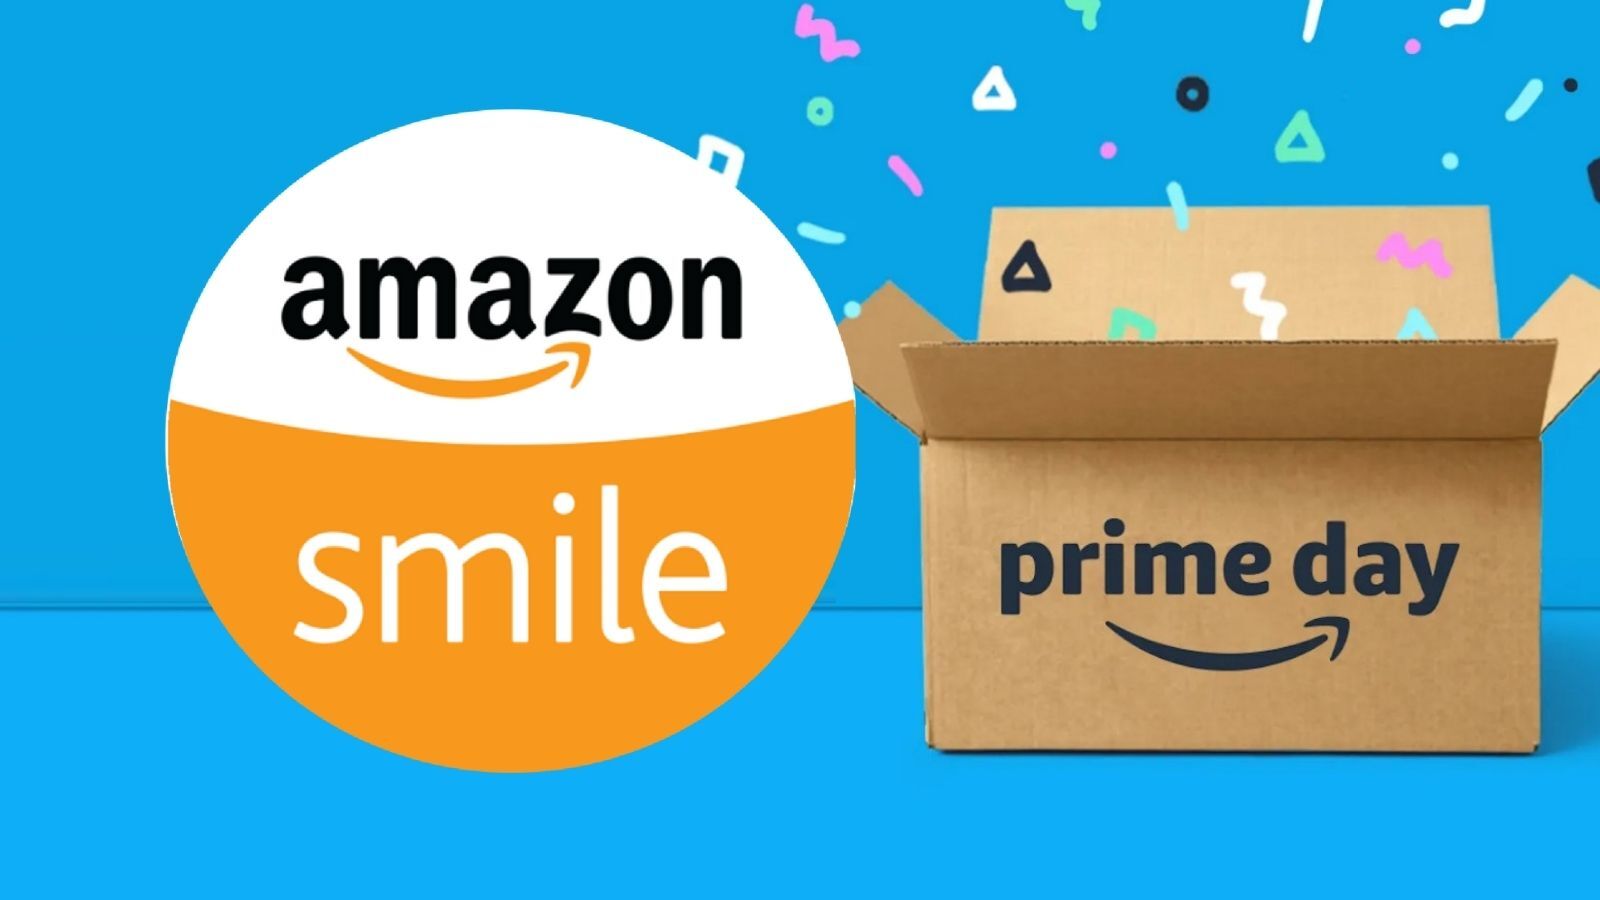 What Is AmazonSmile Prime? (Something You Might Be Interested In)